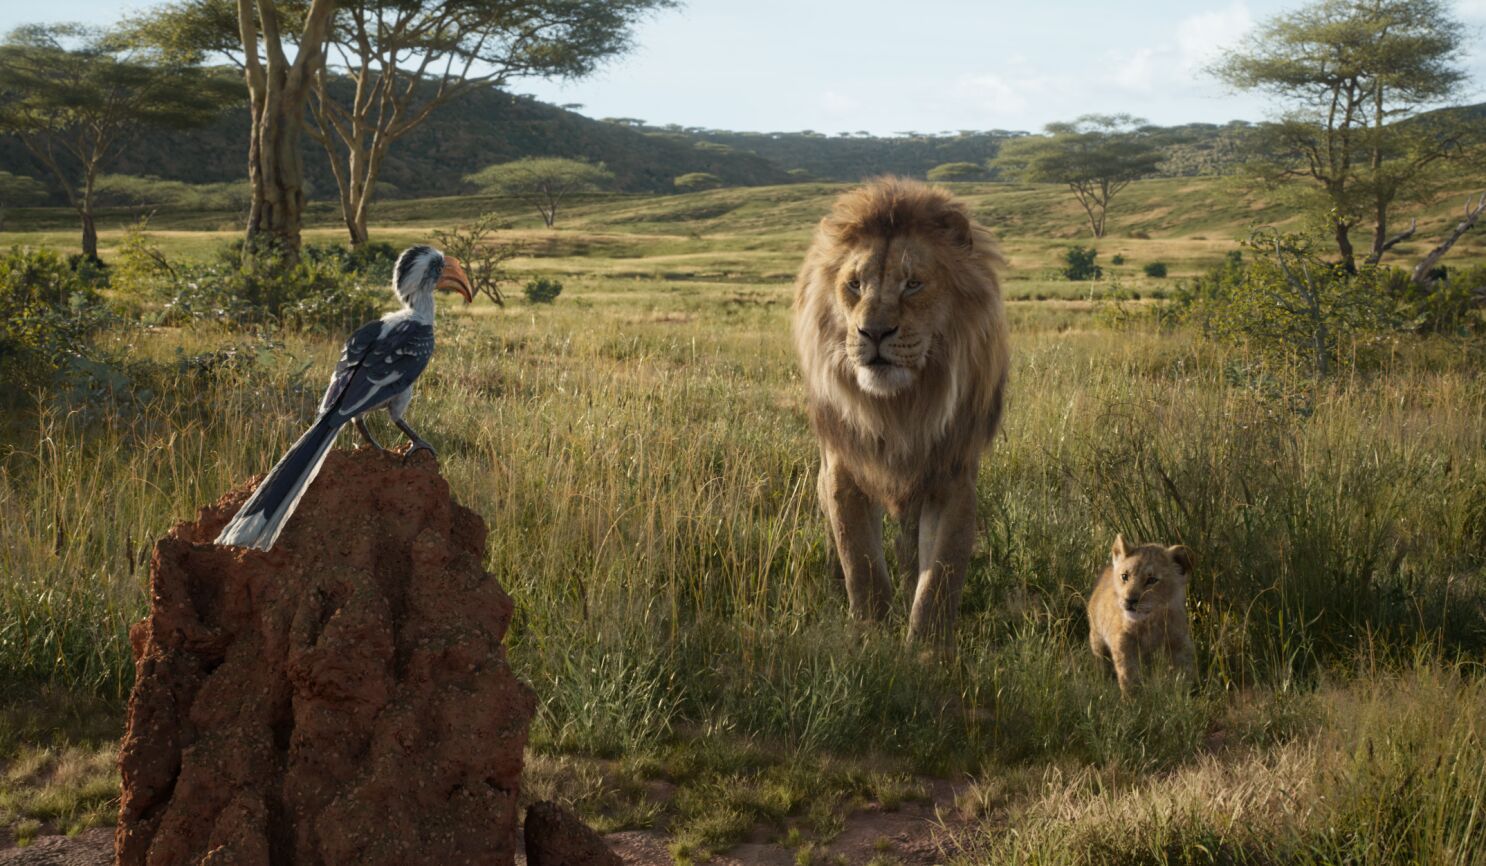 The Lion King is a 2019 American computer-animated epic musical film produced by Walt Disney Pictures. - The Lion King